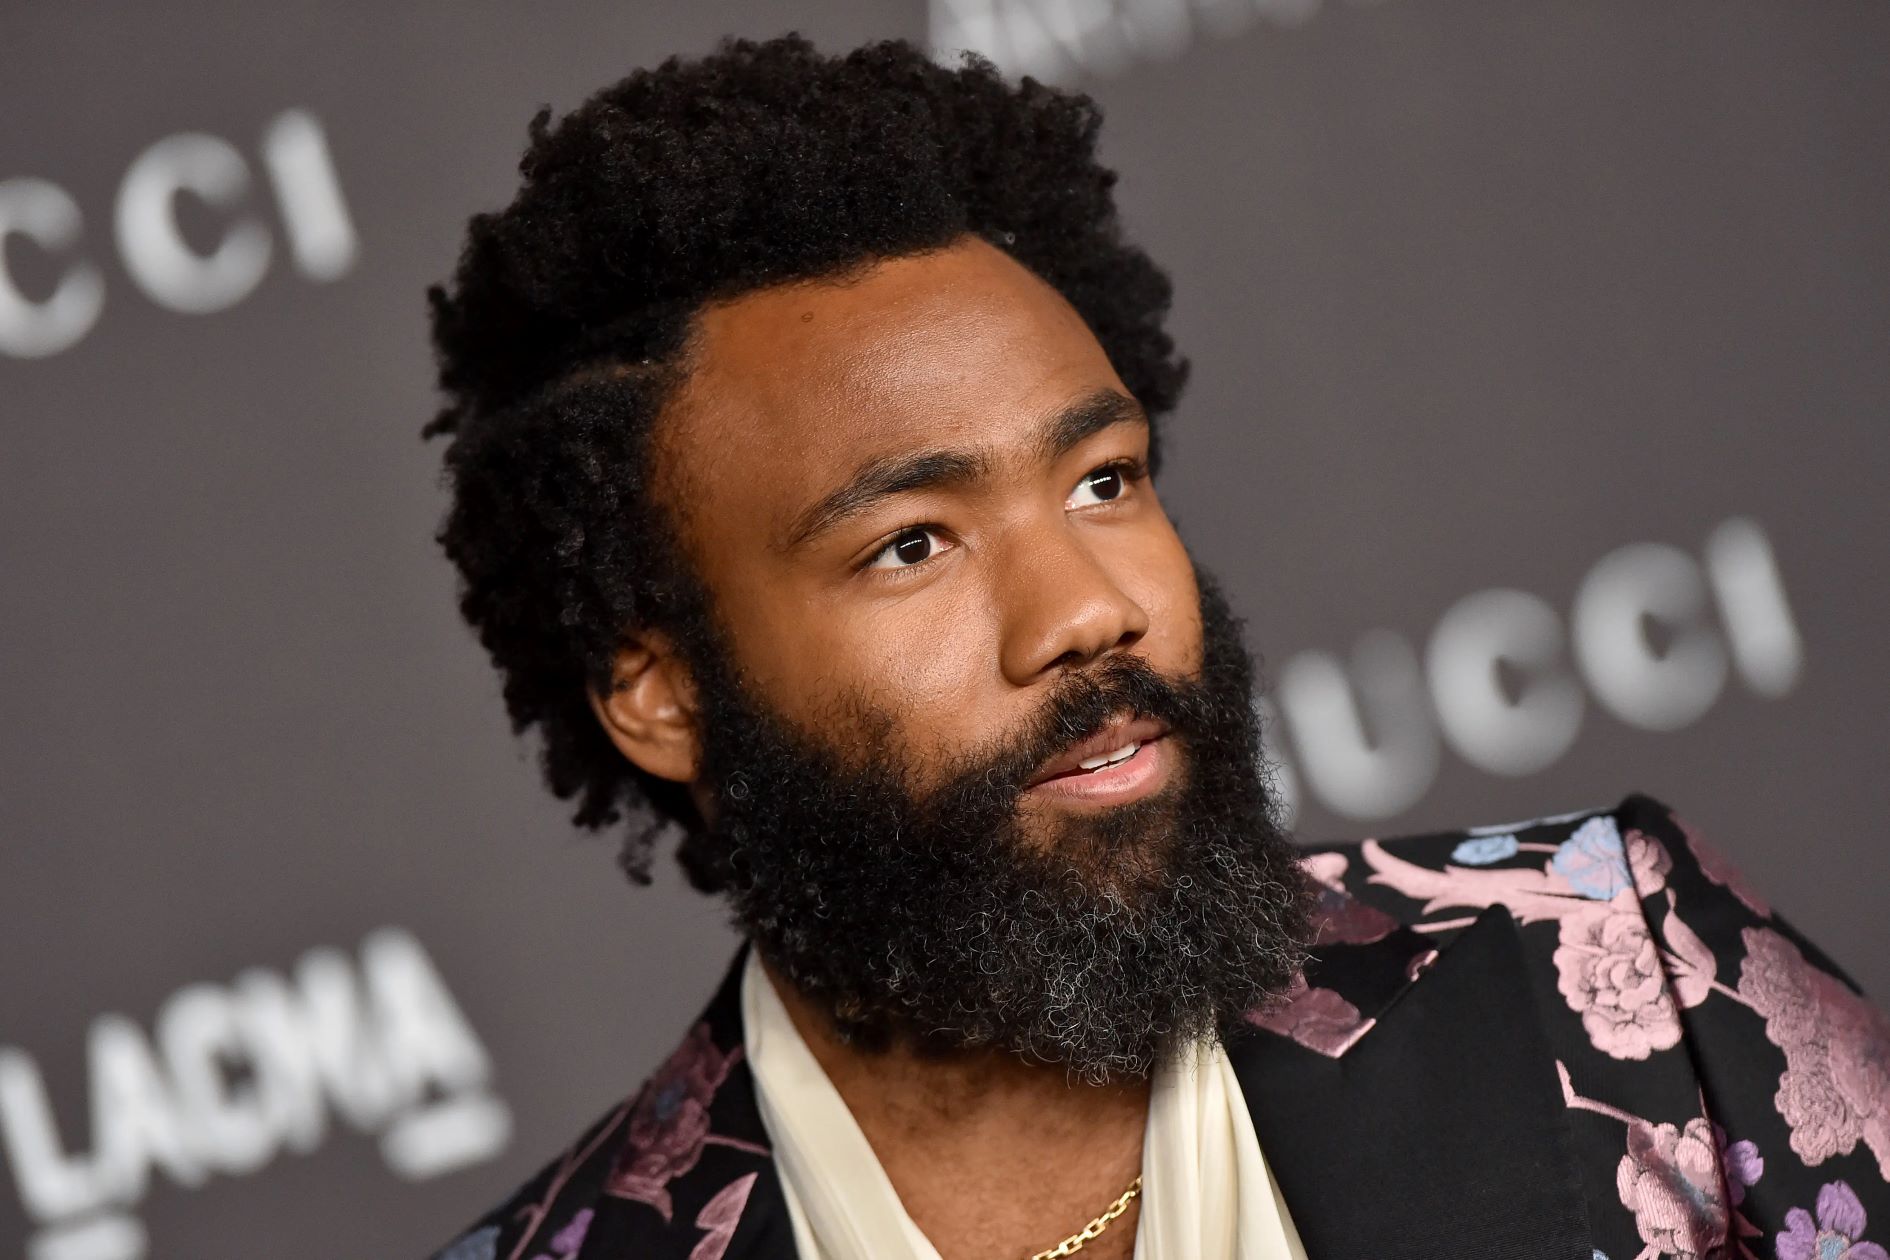 What Record Label Is Childish Gambino Signed To